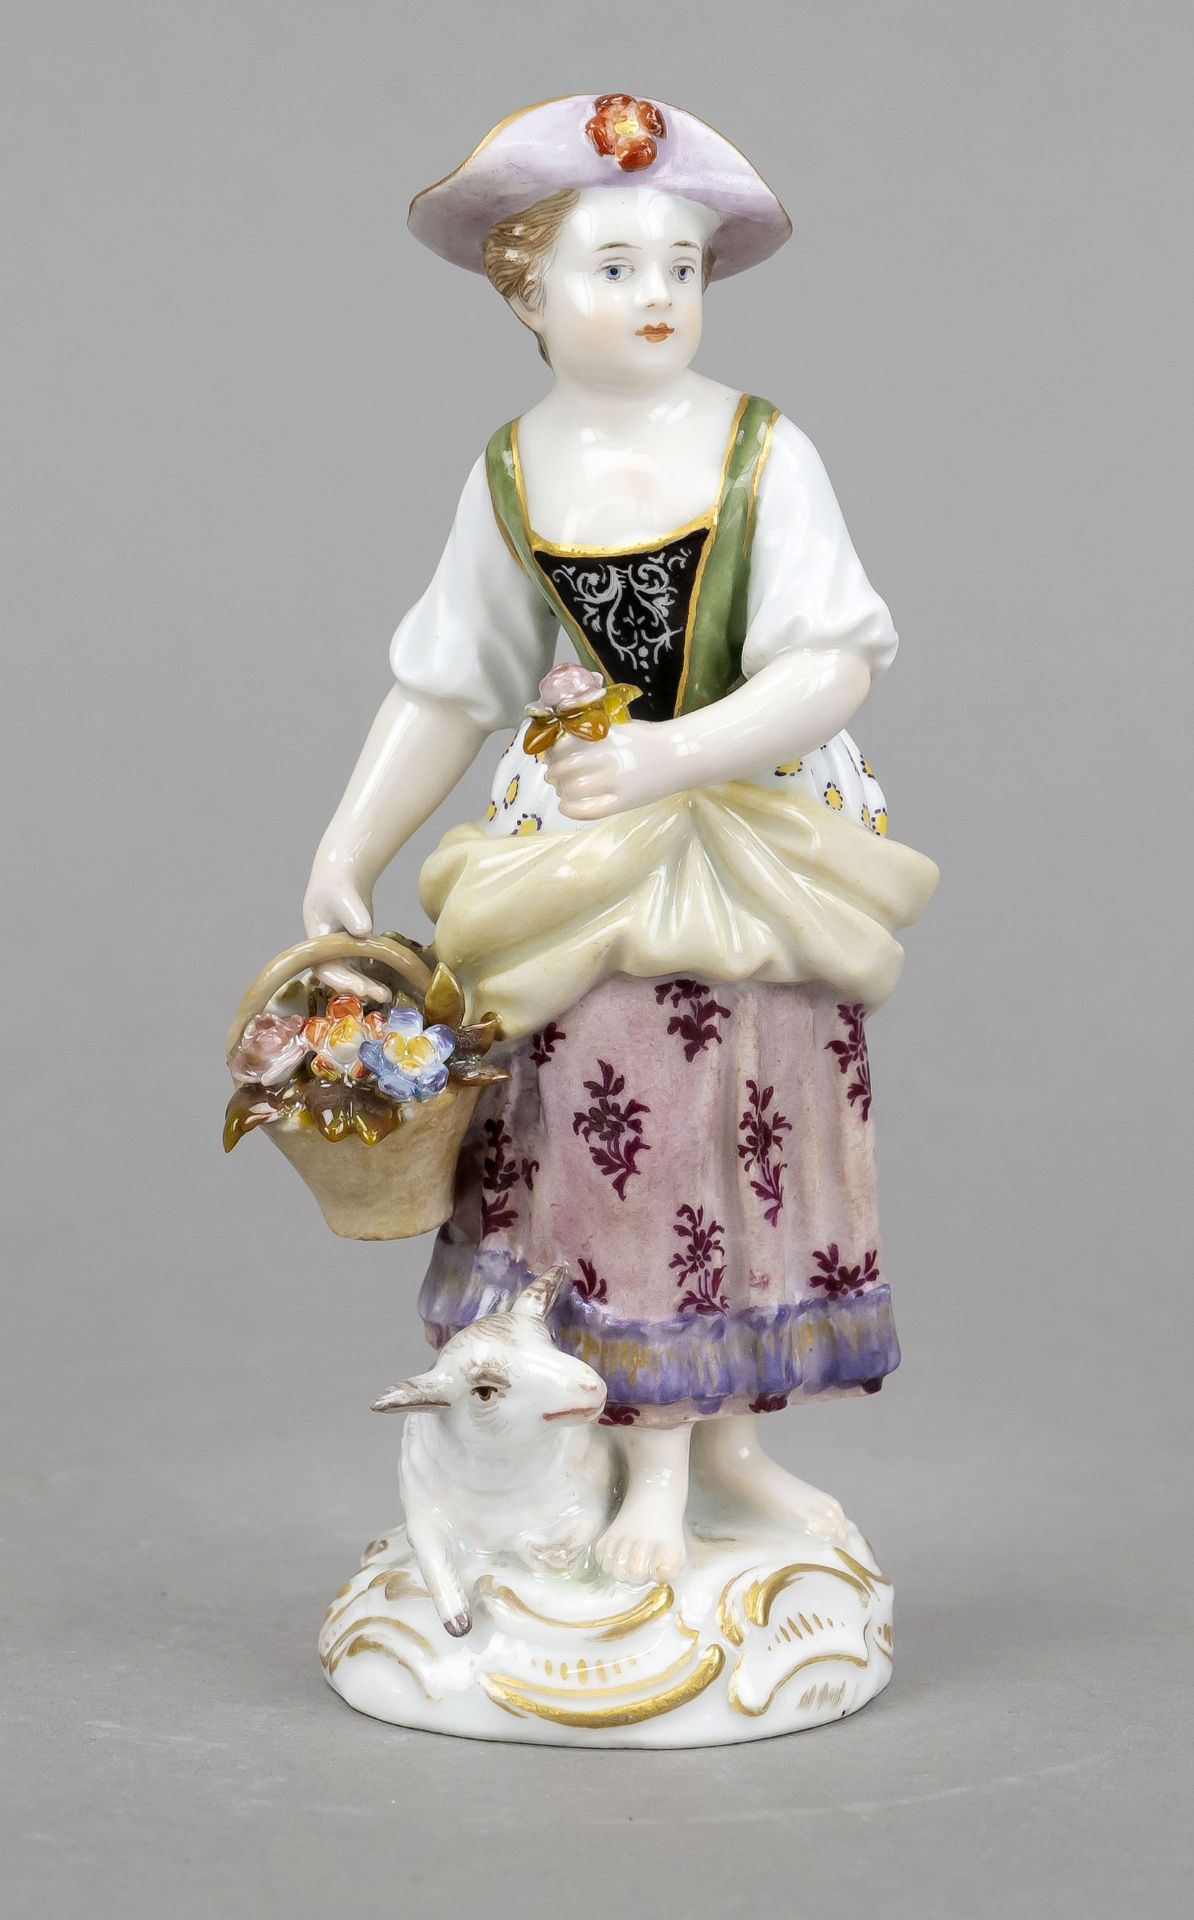 Gardener's girl with lamb and basket of flowers, Meissen, 1850-1924, 1st choice, designed by